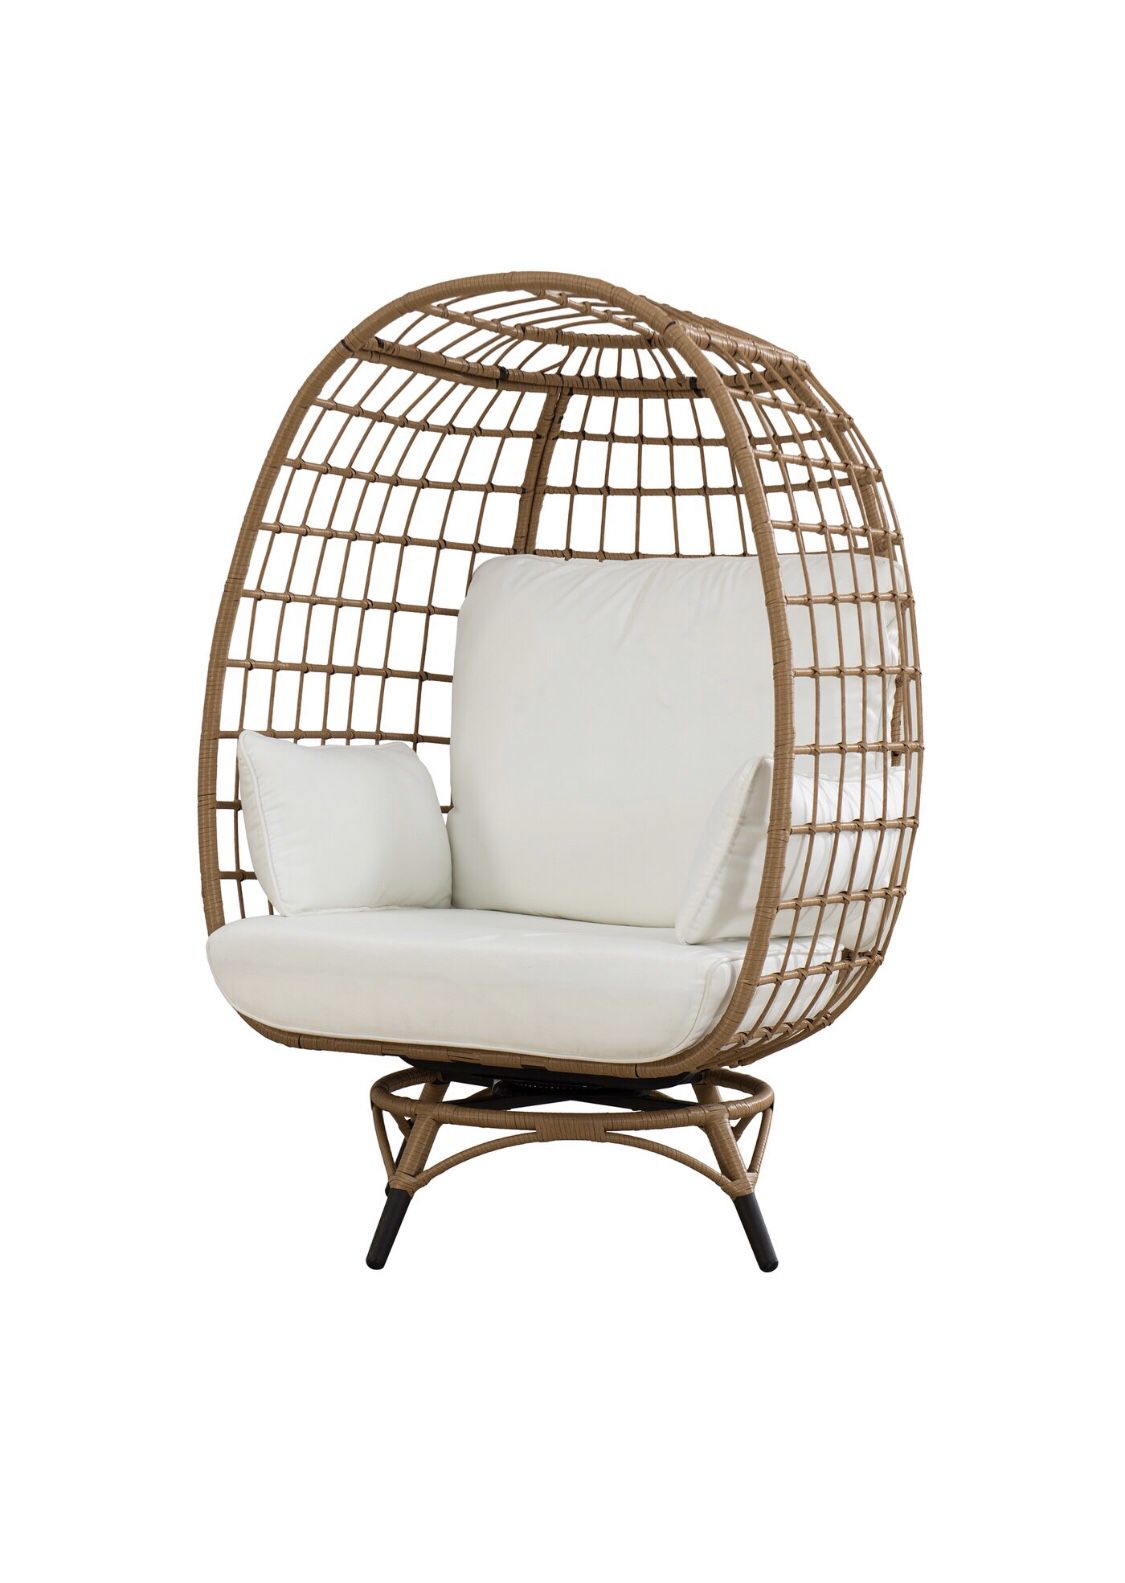 Wellow Baytree Swiveling Egg Chair with Cushions